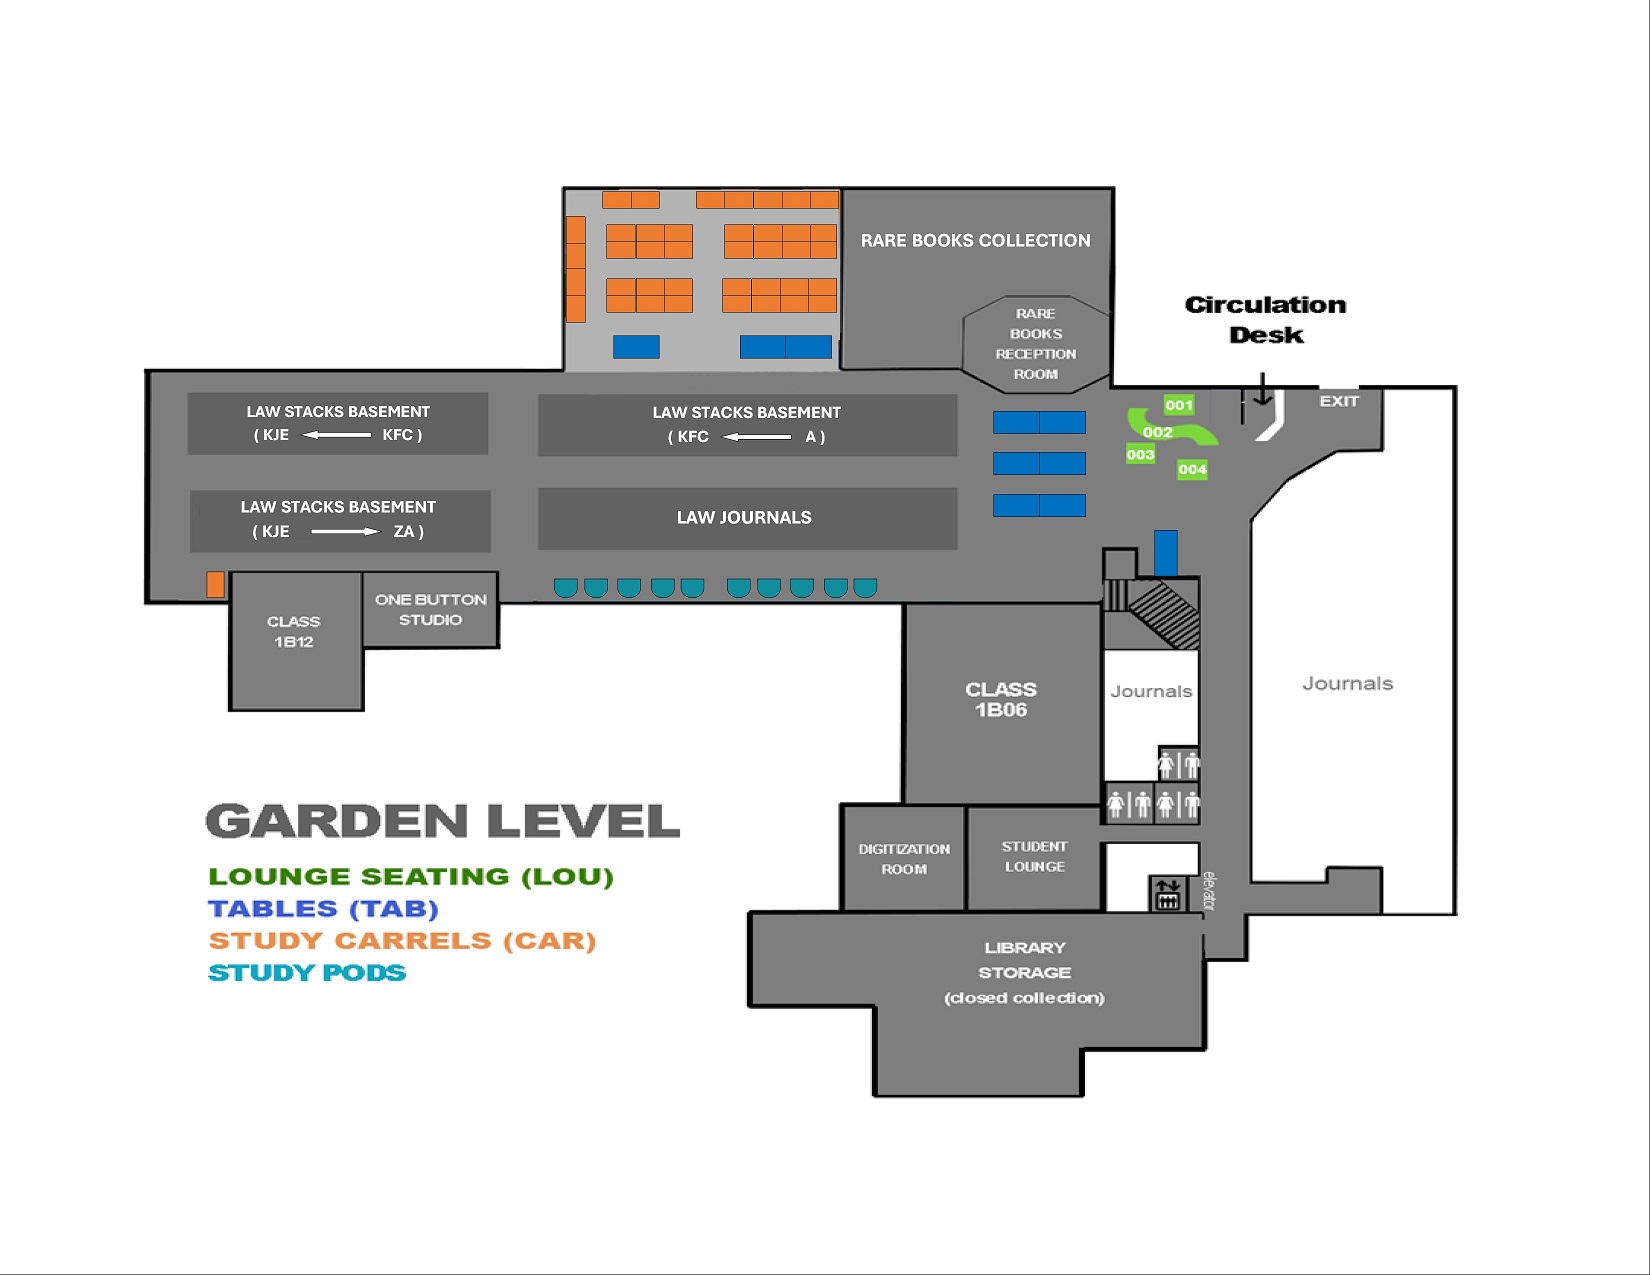 Law Library Garden Level Map